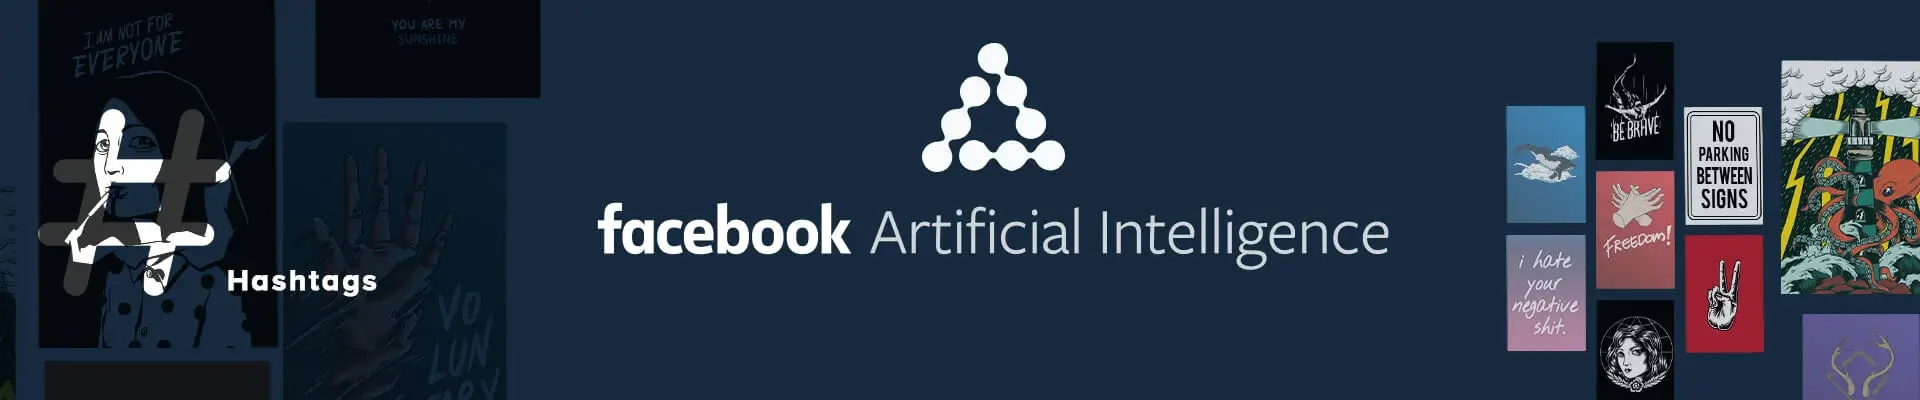 Facebook Is Training AI Through Instagram Hashtags And Images Banner